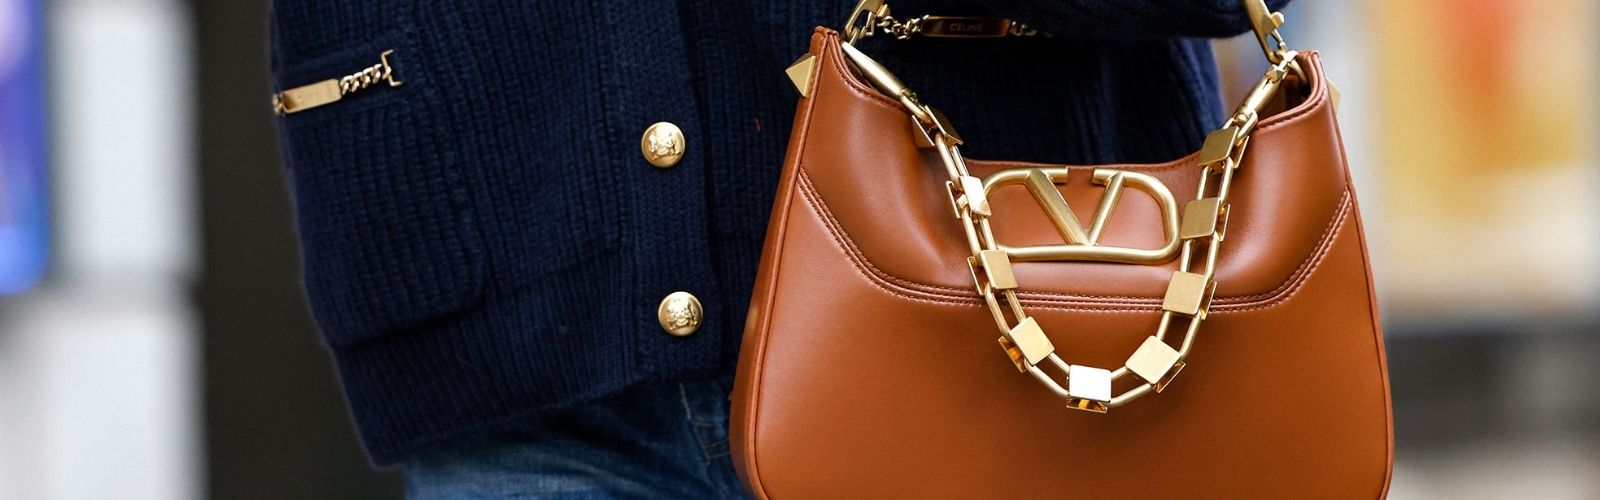 Need to Clean Your Purse? Learn These Quick and Easy Cleaning Tips